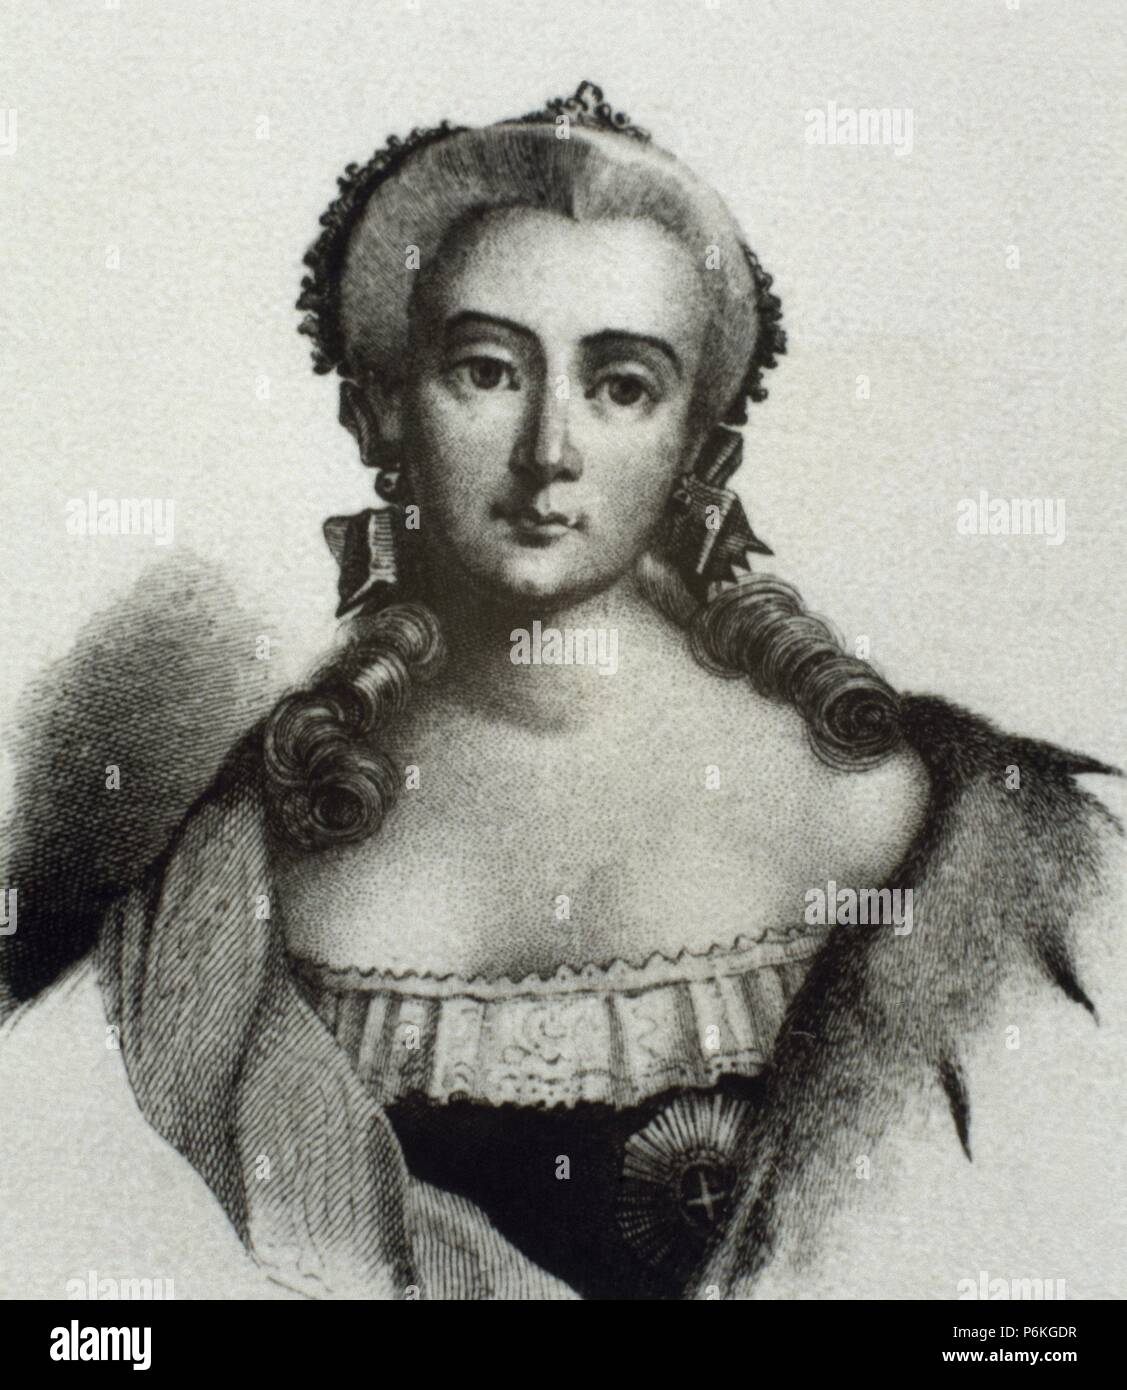 Elisabeth of Russia (1709-1762). Empress of Russia. House of Romanov. Portrait. Engrving. Stock Photo